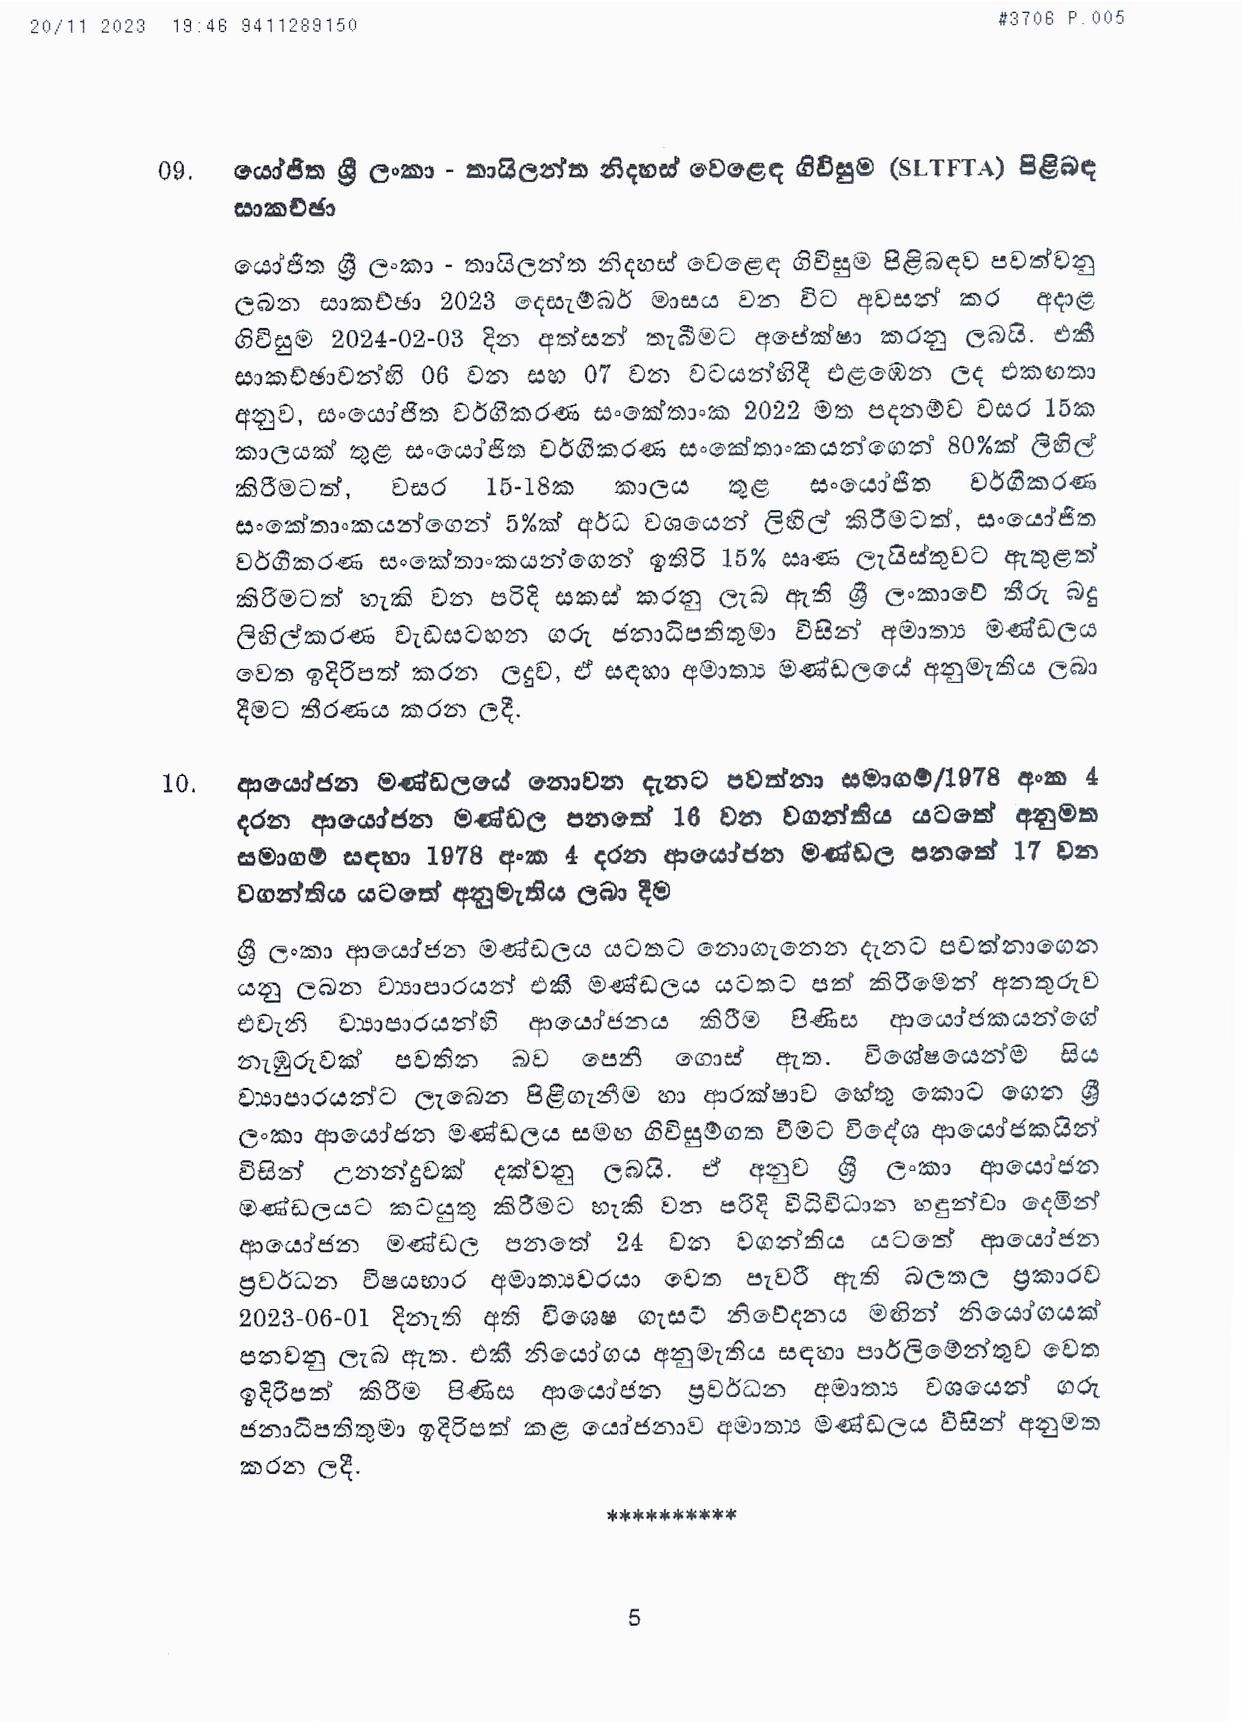 Cabinet Decisions on 20.11.2023 page 005